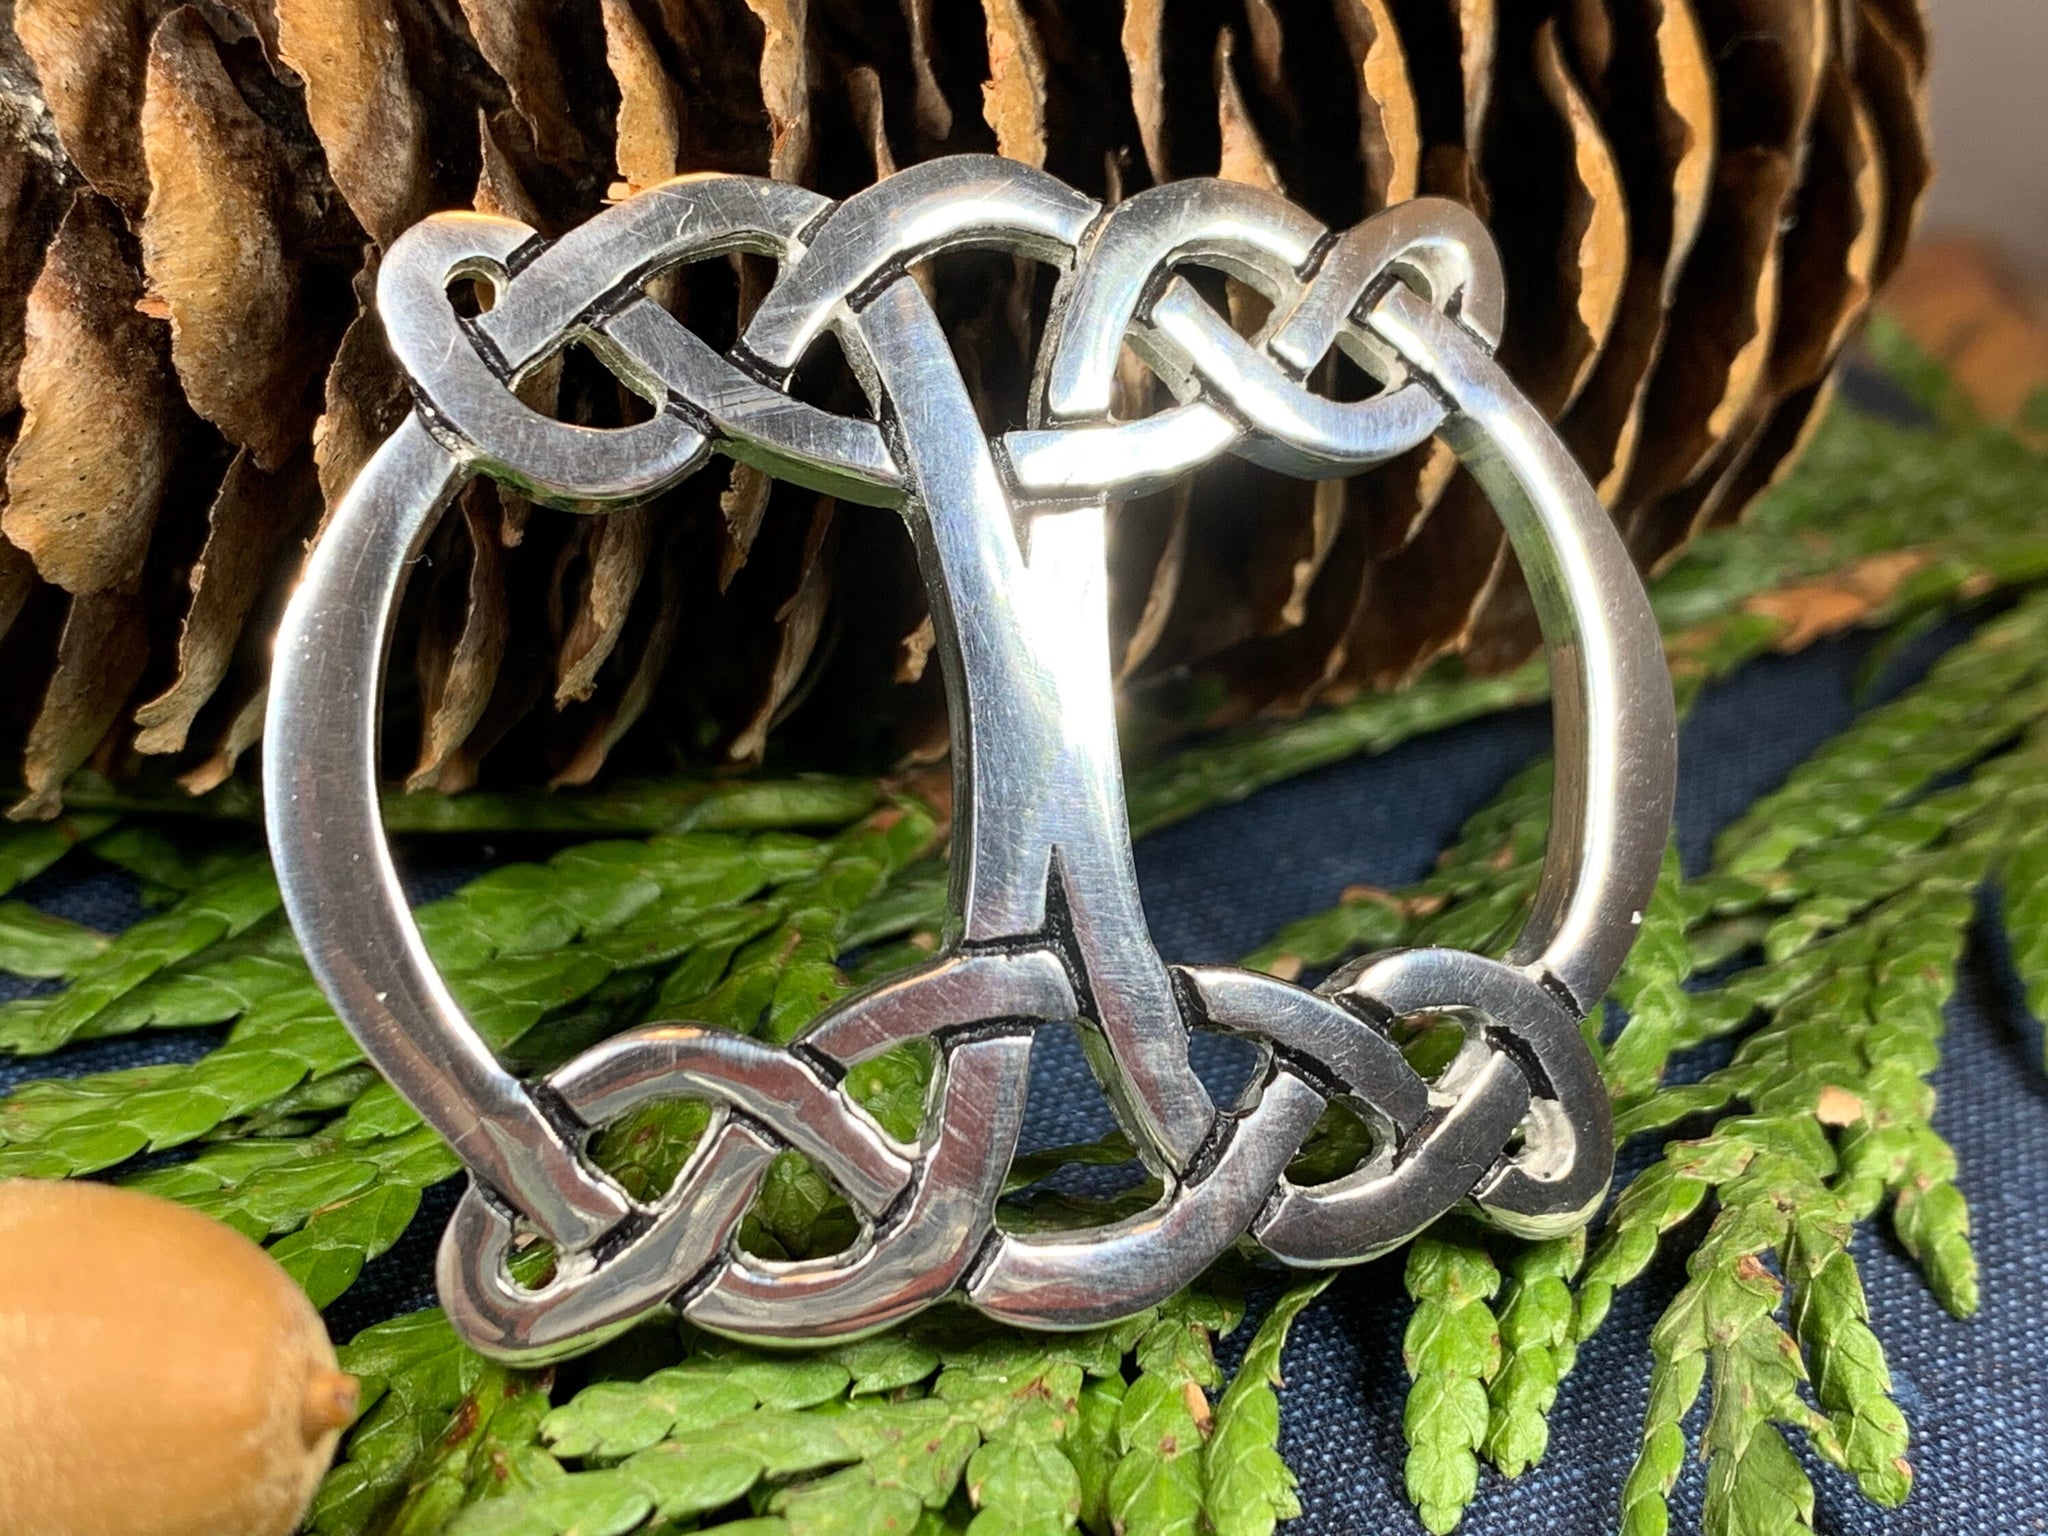 Thistle and Celtic Knot Pewter Scarf Ring – Large – The Celtic Knot